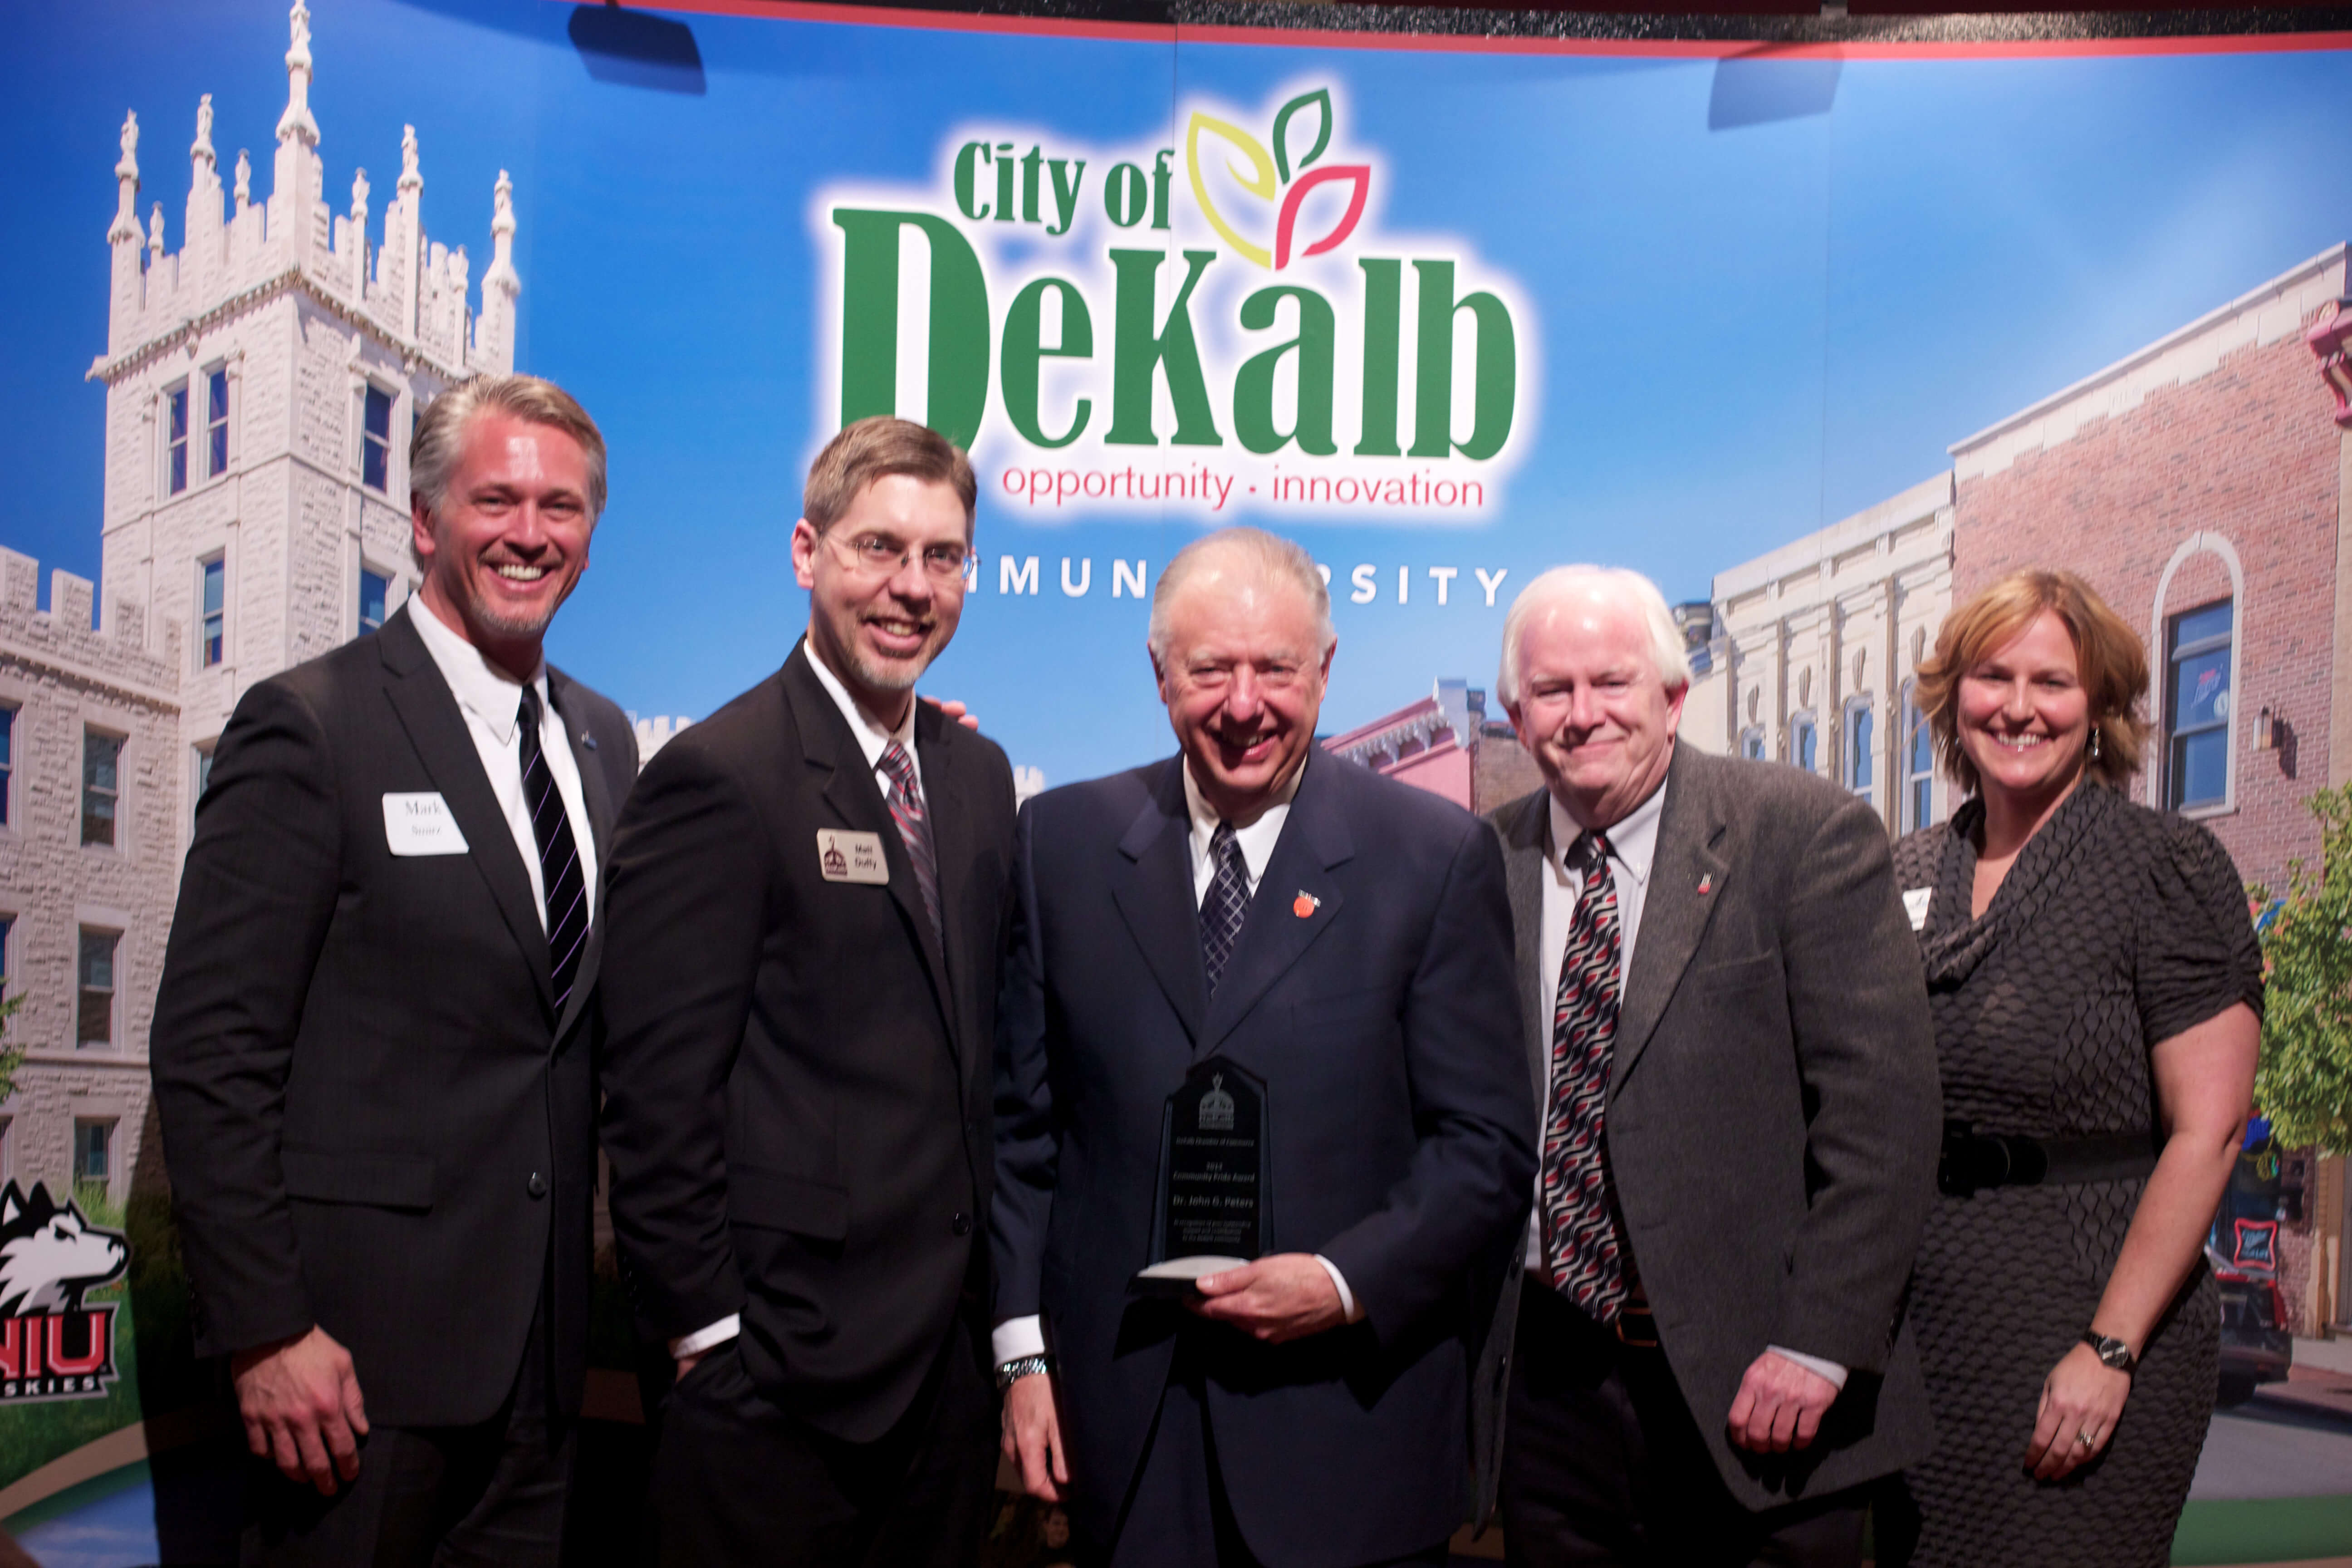 President John G. Peters (center) receives the Community Pride Award, flanked by (left to right) Mark Smirz, Matt Duffy, Bill Finucane and Wendy West-Krauch.